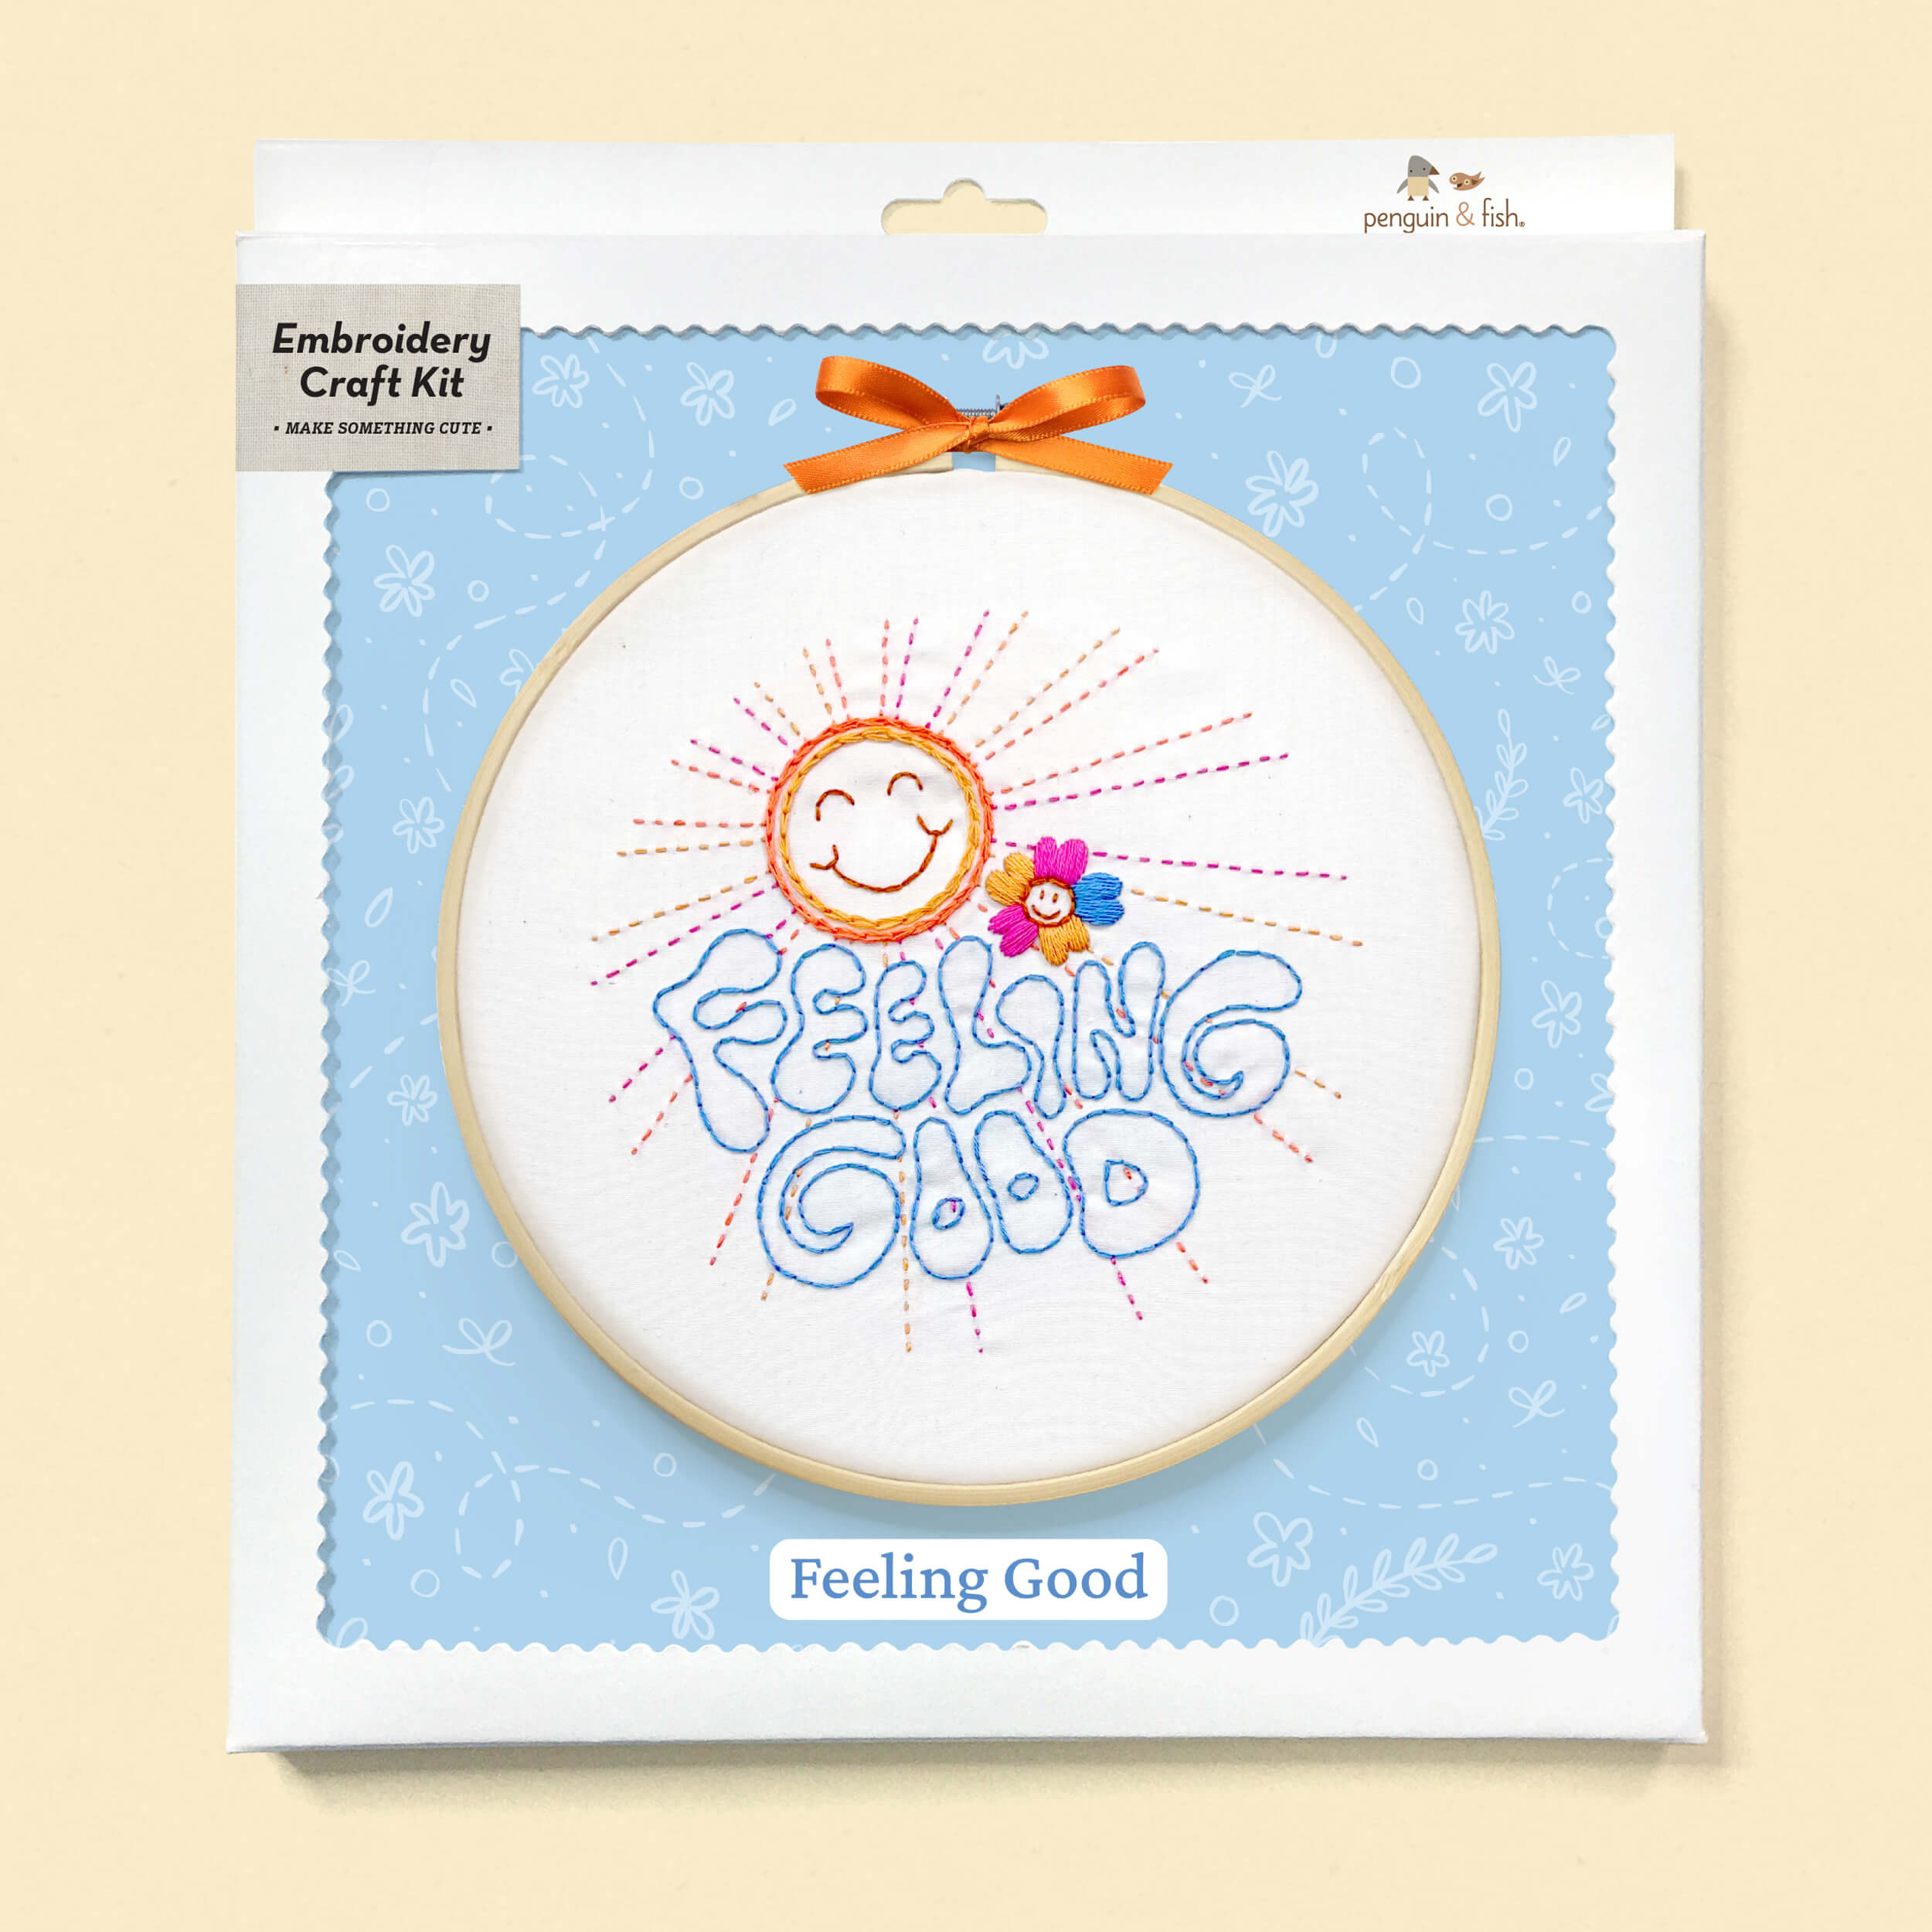 Feeling Good embroidery kit in a box